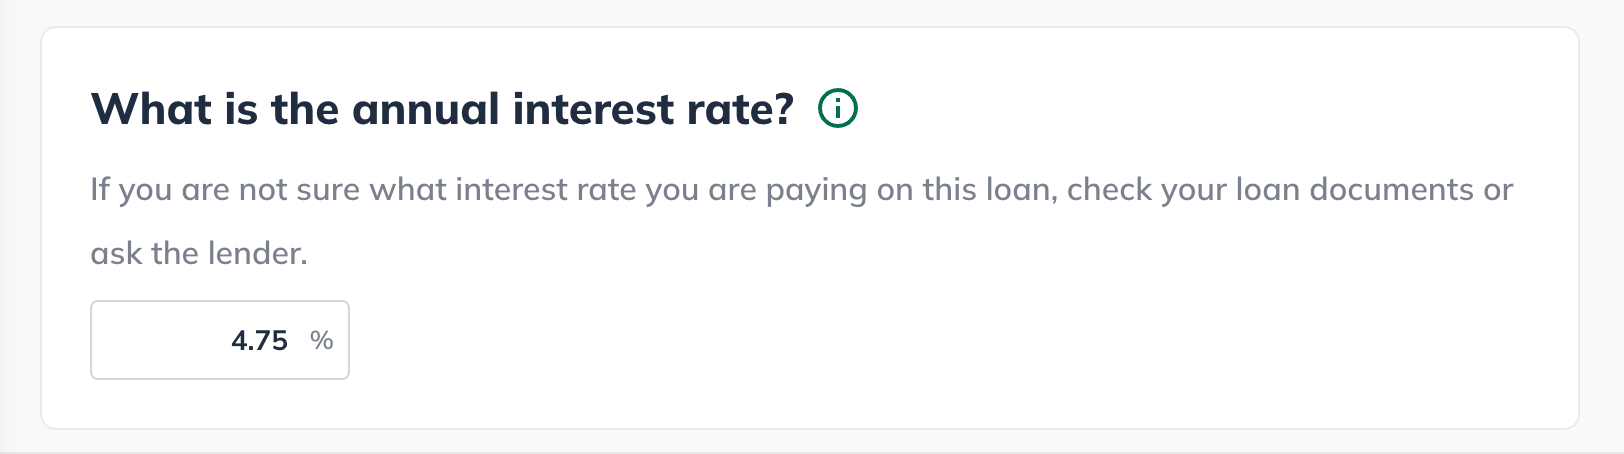 add loan before start date interest rate.png